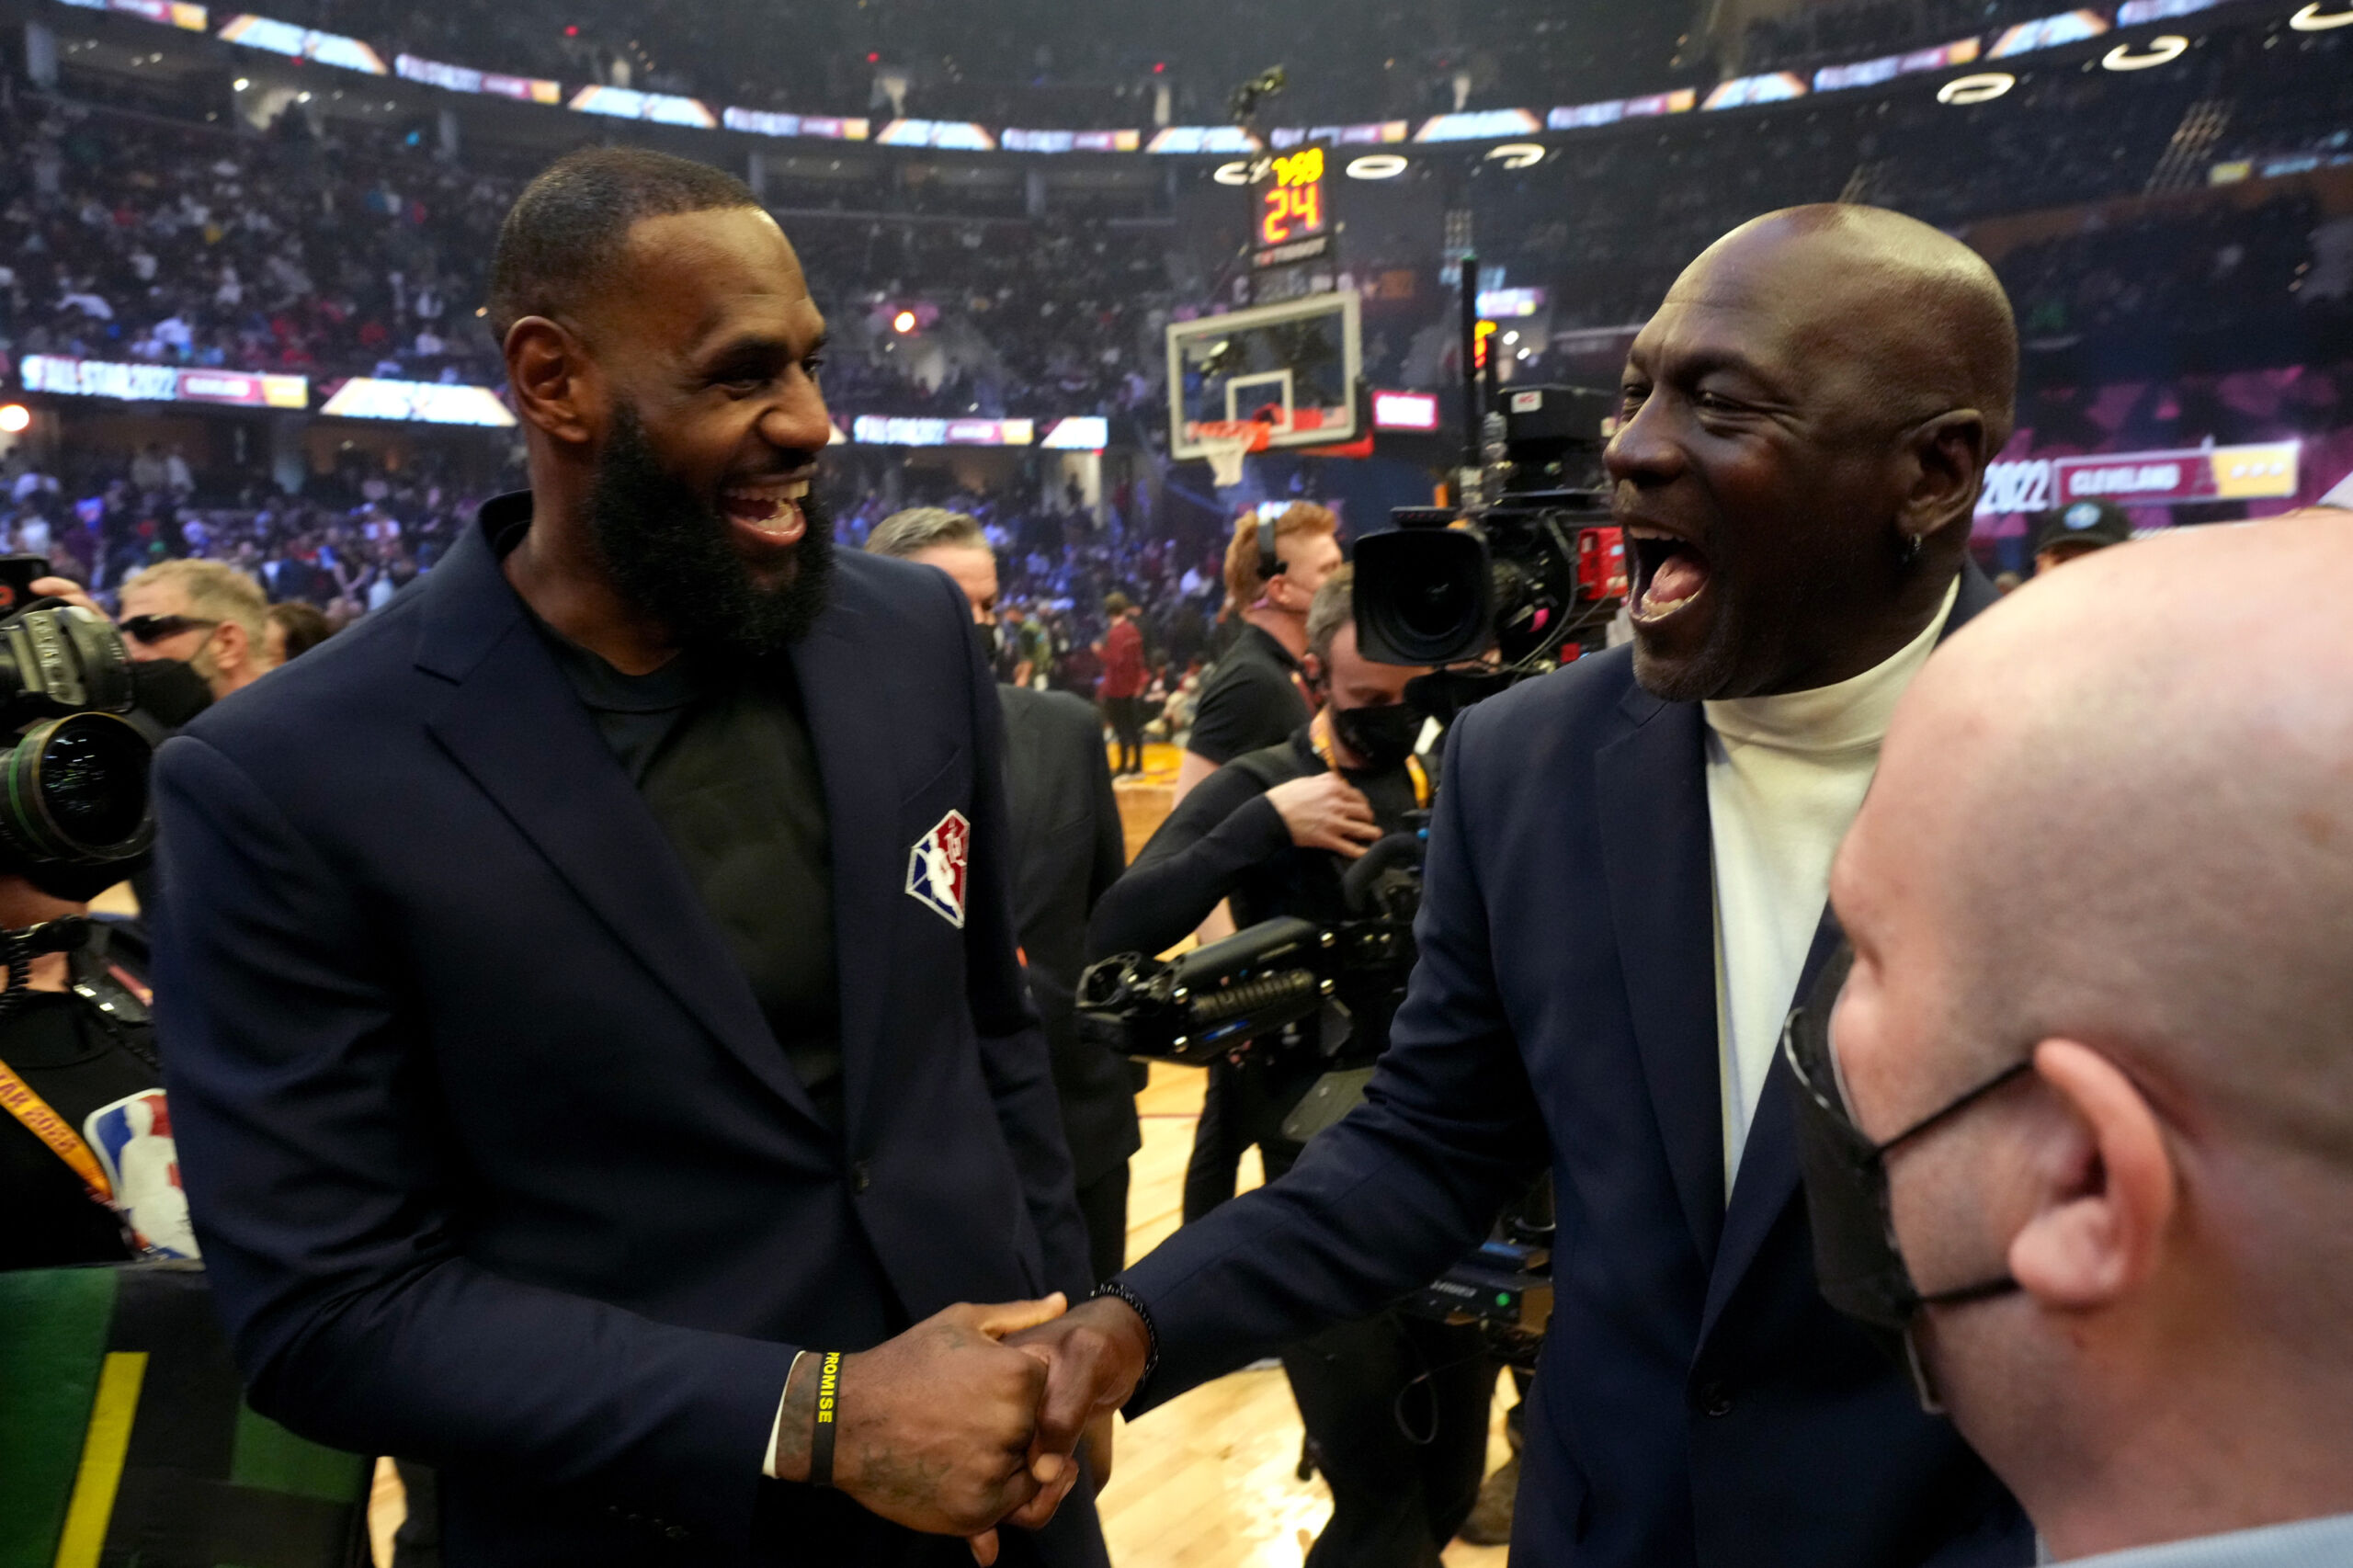 Shannon Sharpe says LeBron's All-Star team is 'the greatest